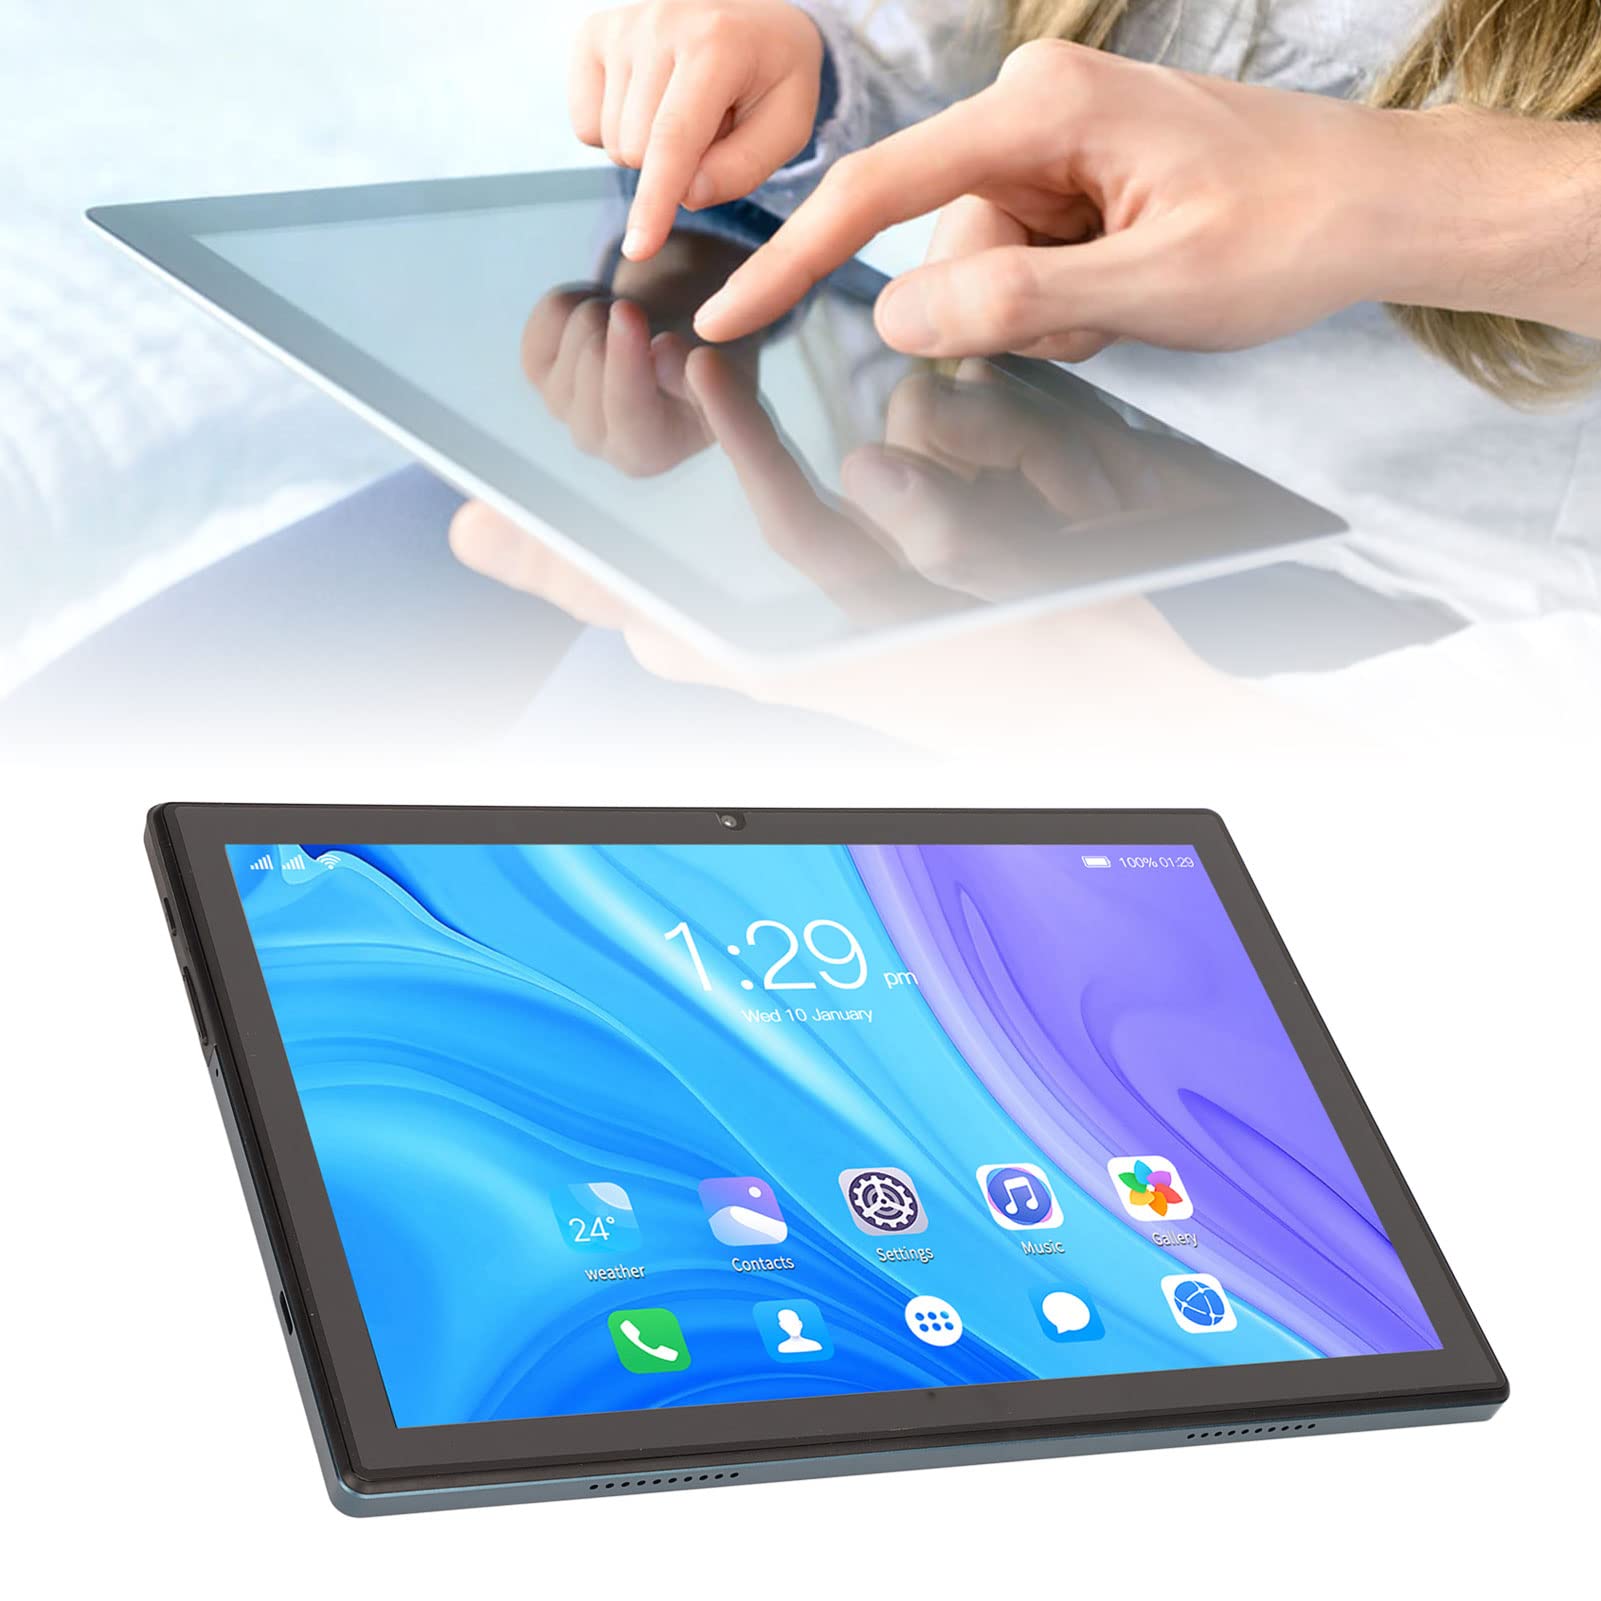 Heayzoki 10 Inch HD Tablet, 6GB 128GB Calling Tablet, IPS HD Touchscreen Blue Callable Tablet, Octa Core Processor, 2.4G 5G Dual Band WiFi